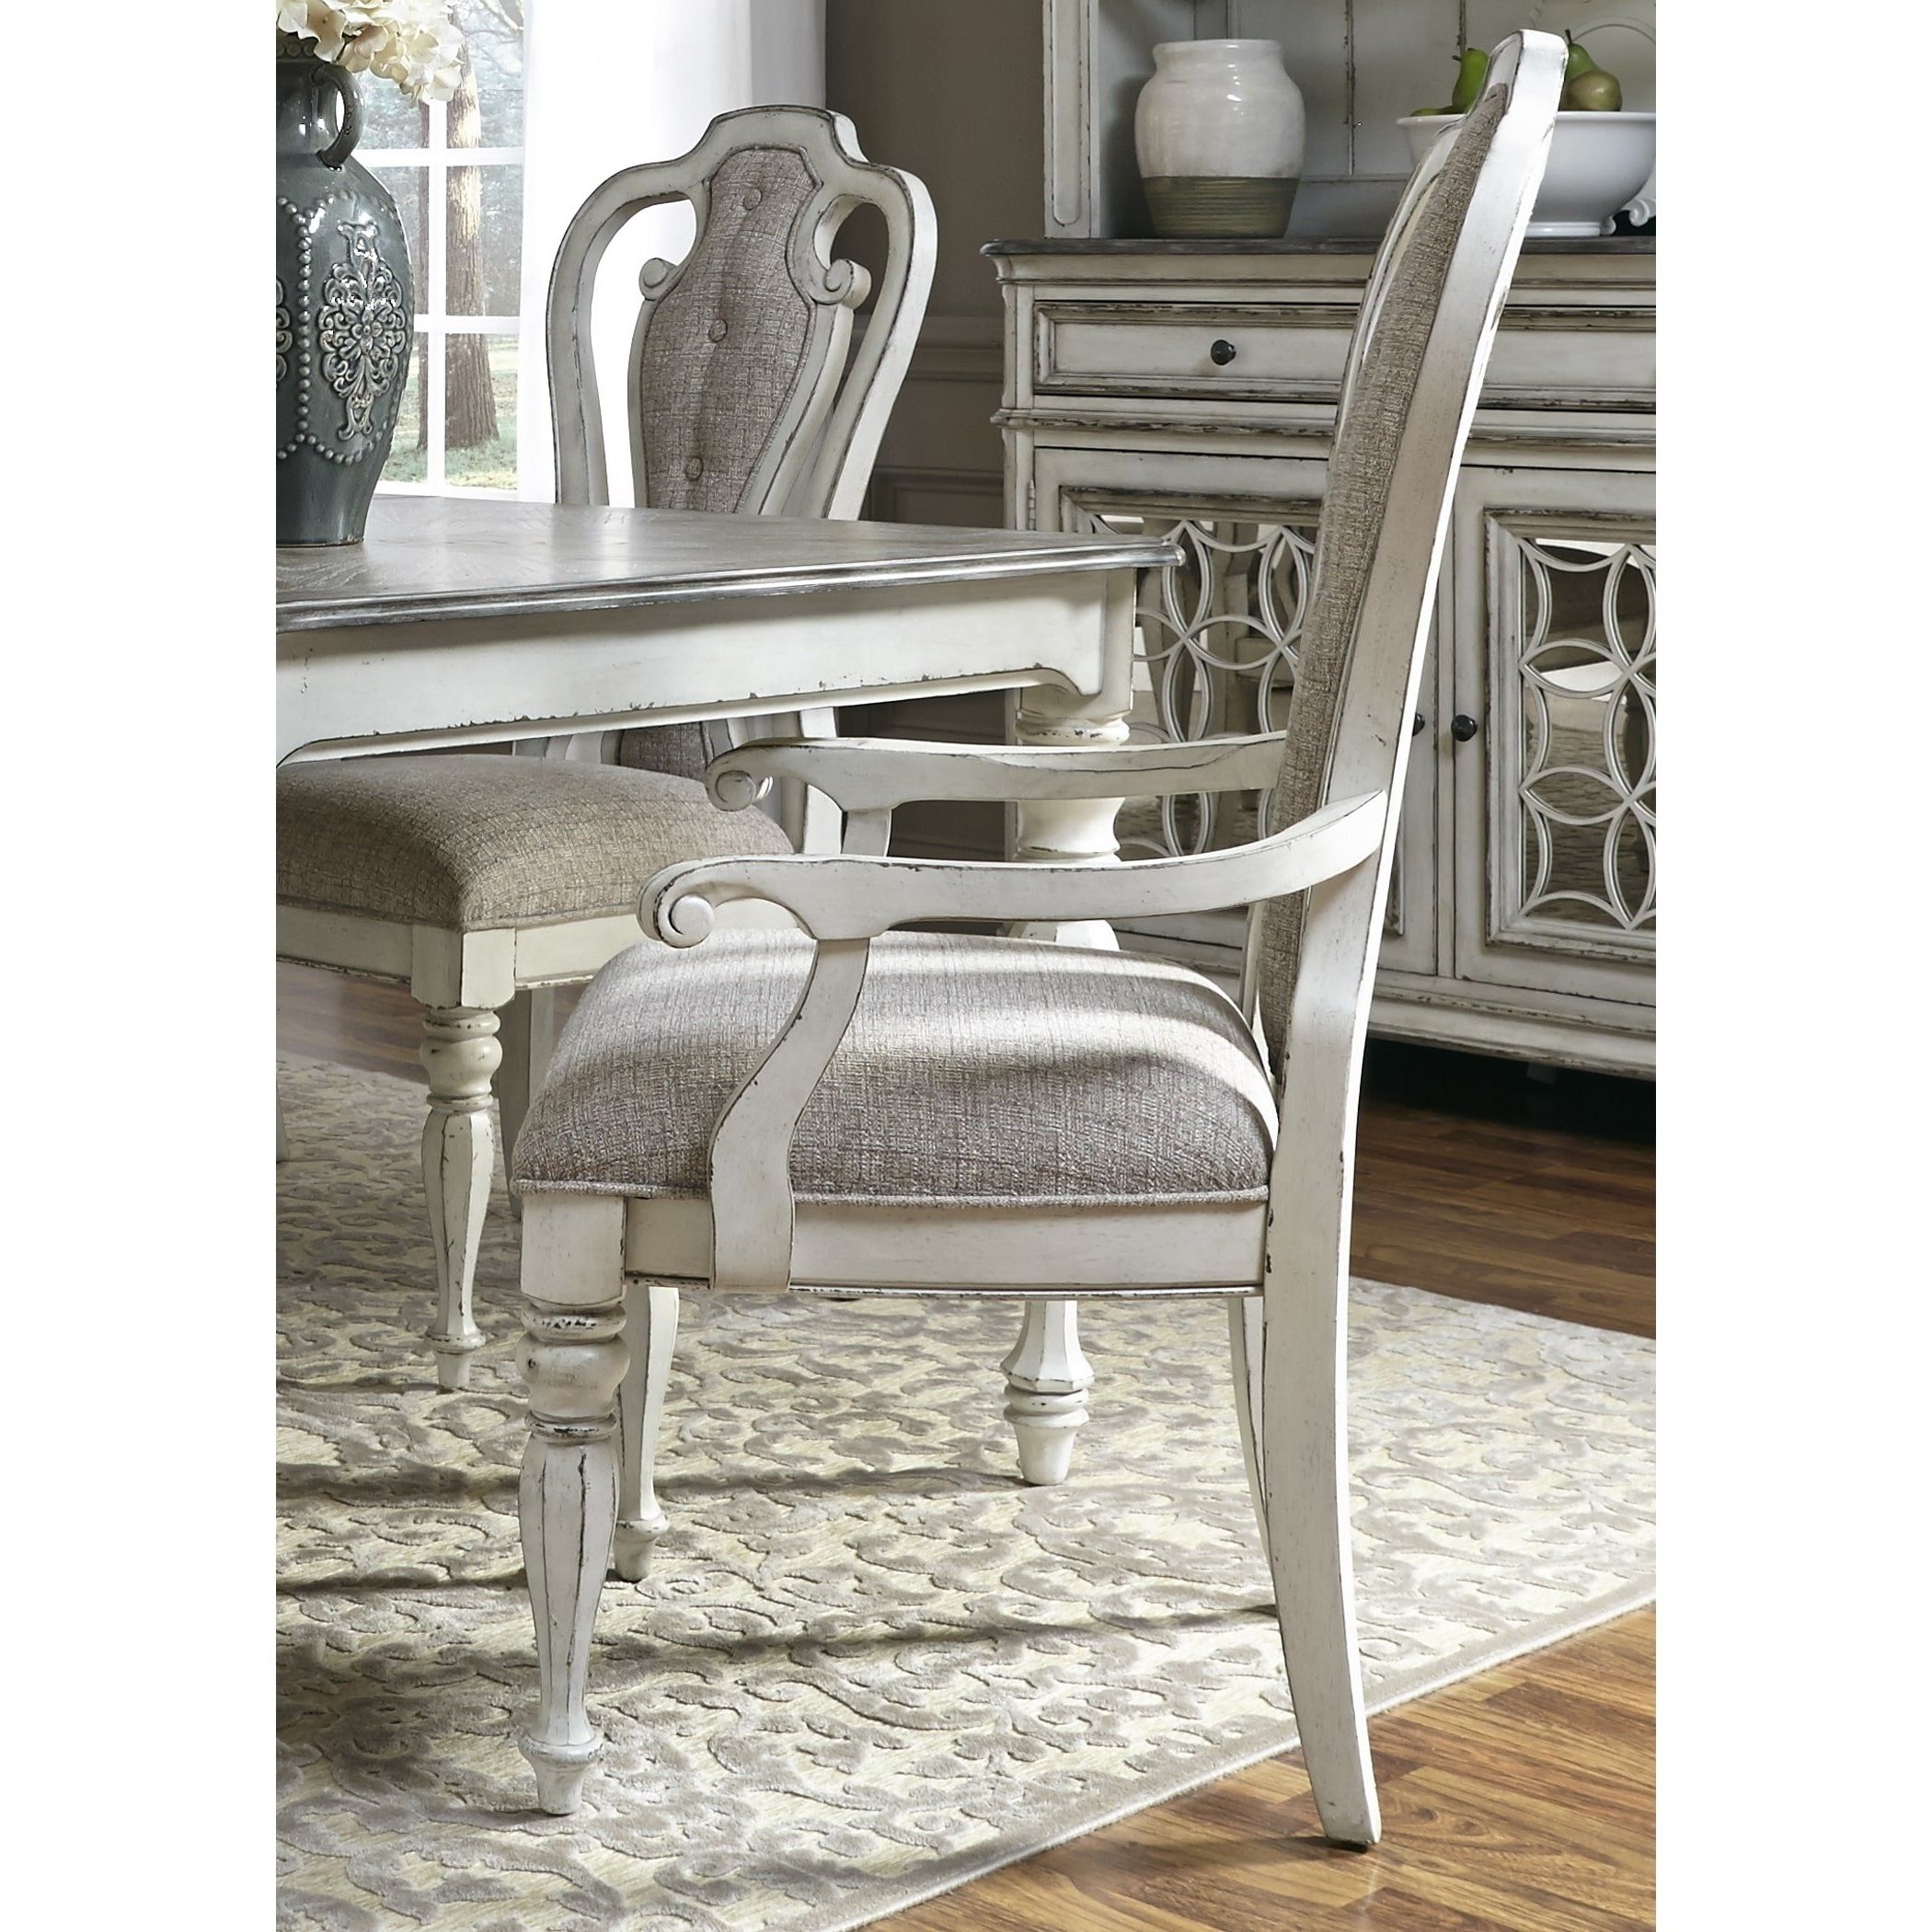 Magnolia Home Reed Arm Chairs Throughout Well Liked Shop Magnolia Manor Antique White Upholstered Arm Chair – Free (View 12 of 20)